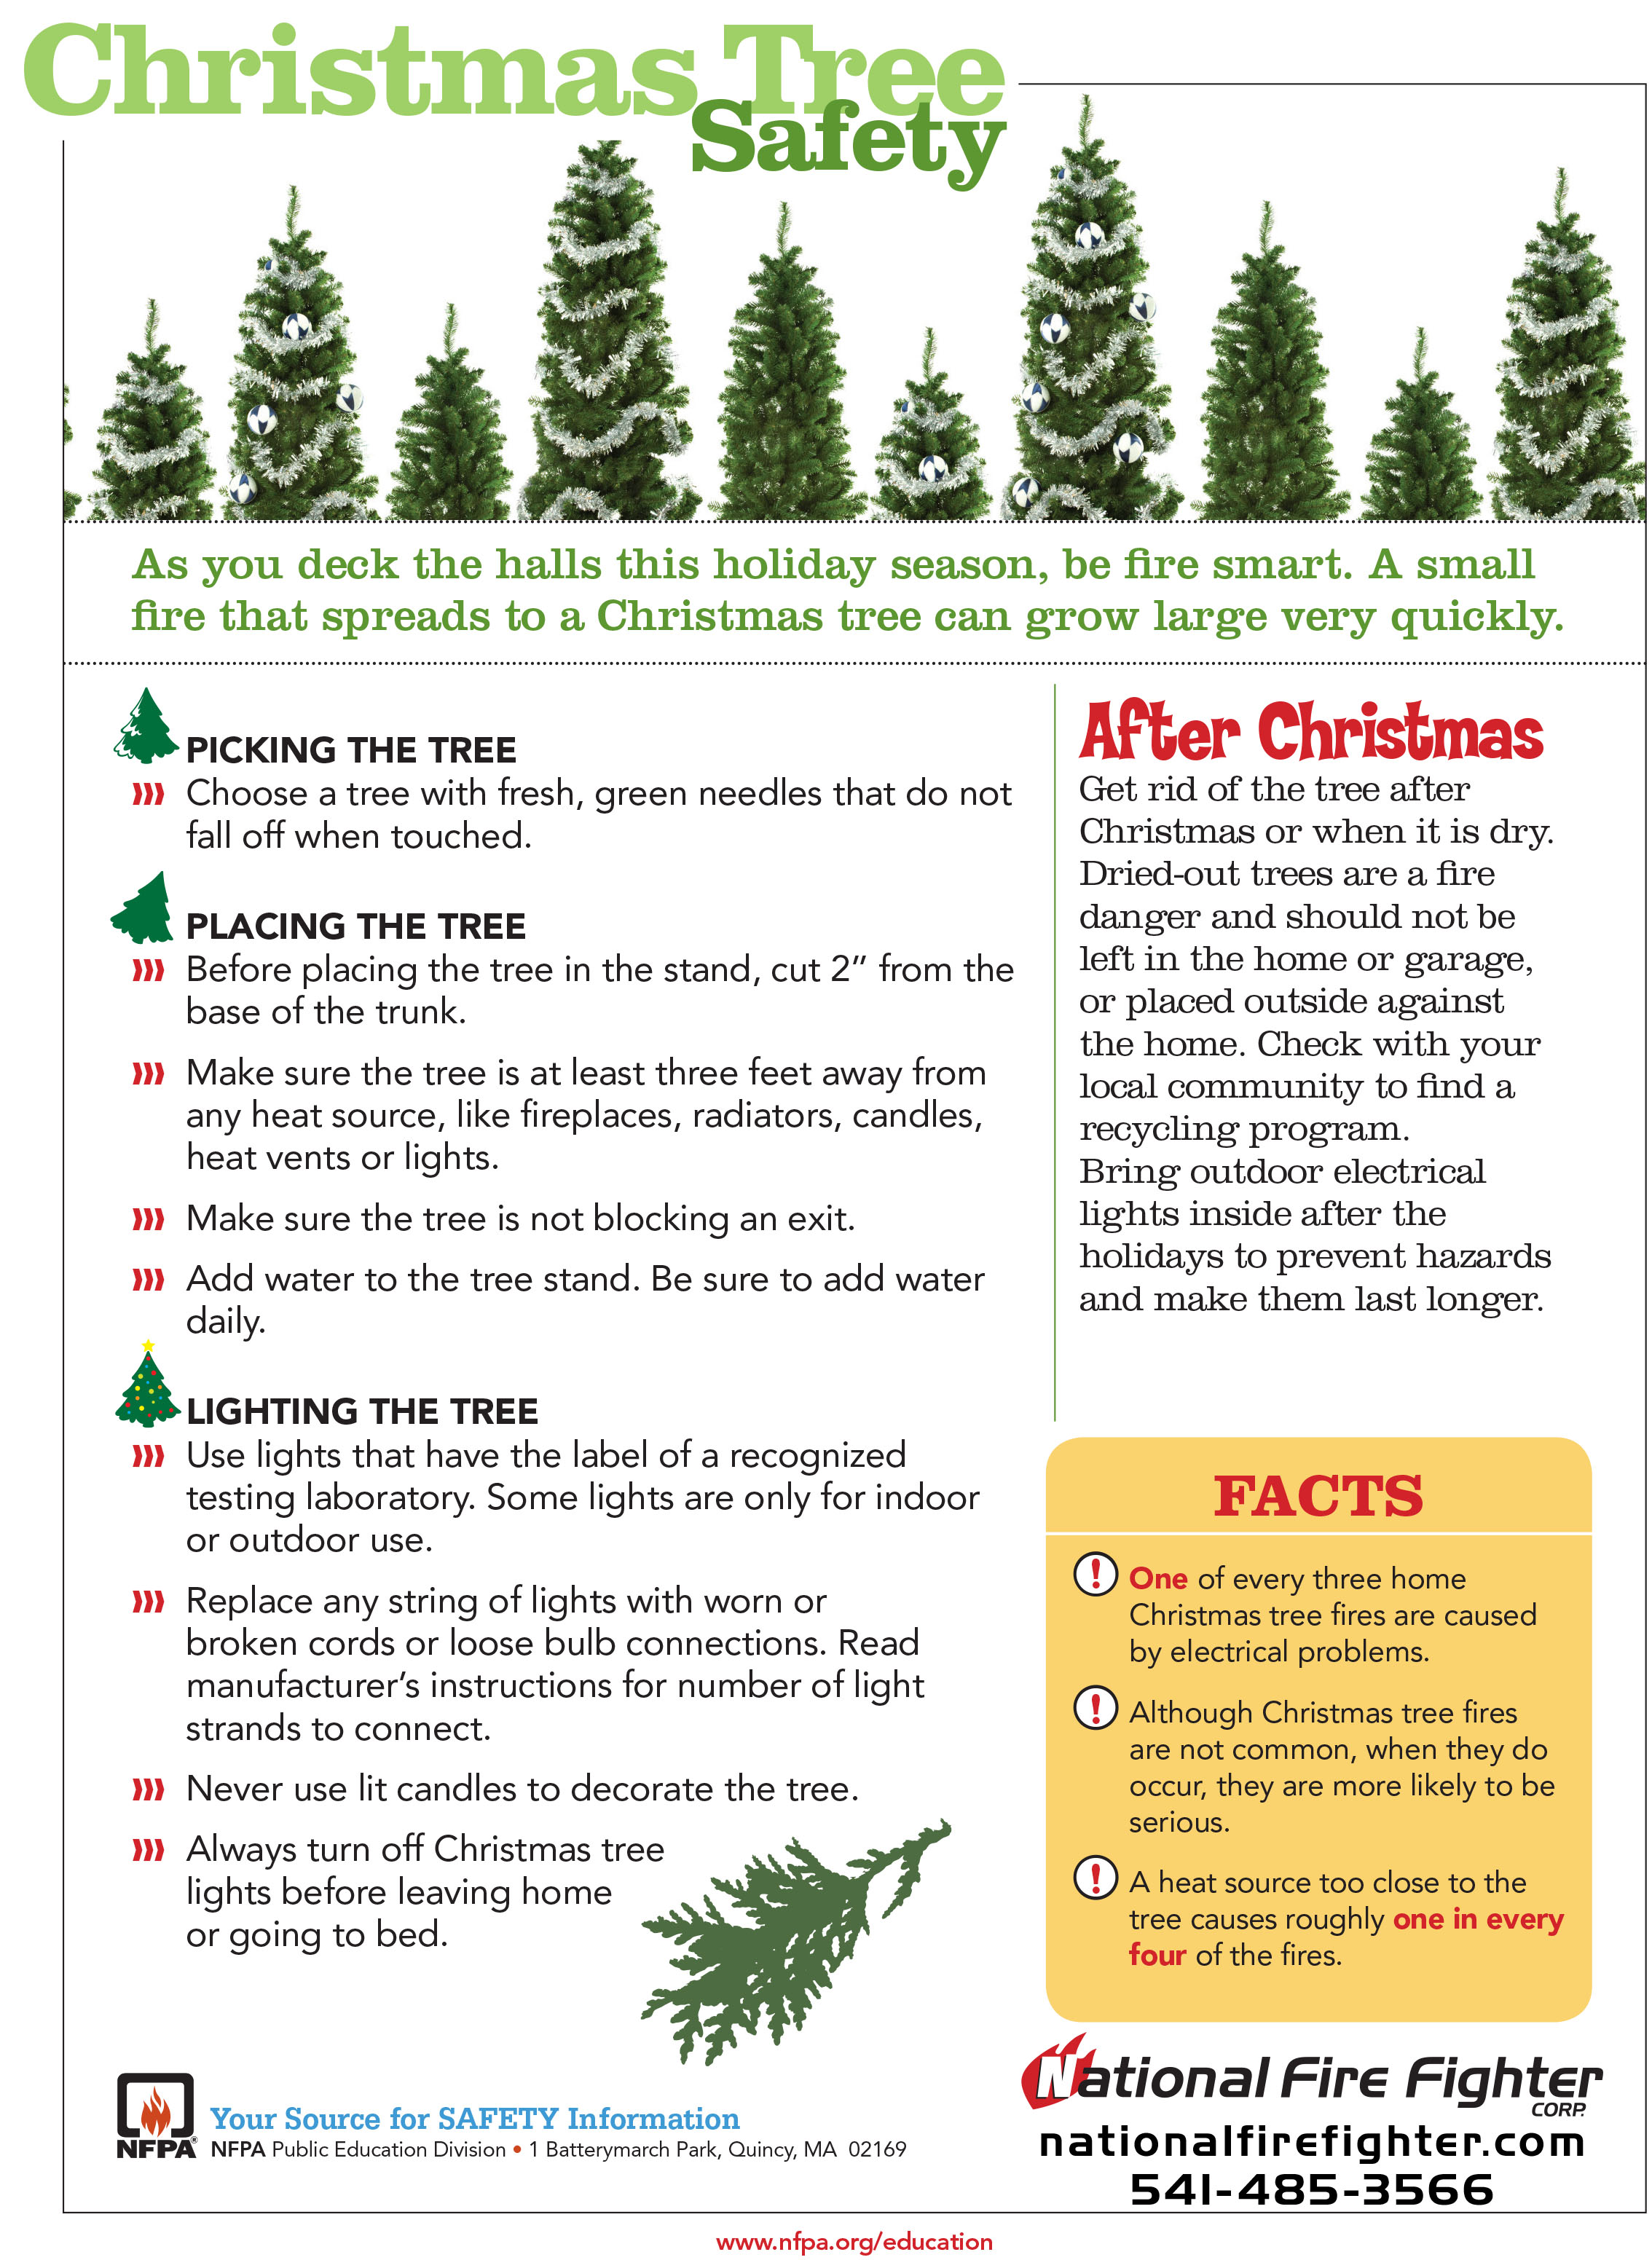 Five Steps for Winter Tree Safety